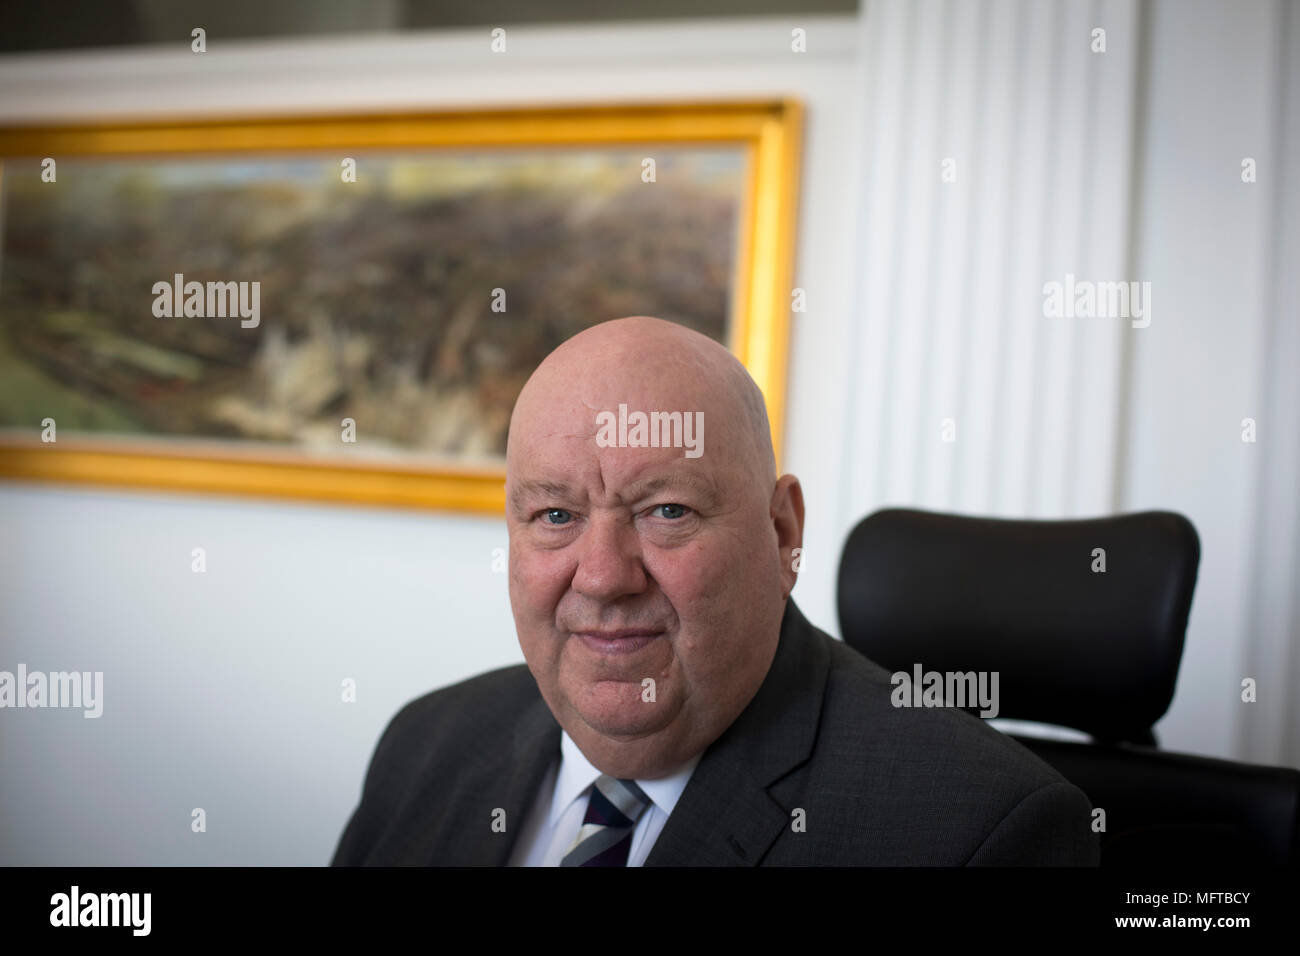 The Mayor of Liverpool, Cllr Joe Anderson, pictured in the mayor's Office within the Cunard Building in Liverpool. Stock Photo